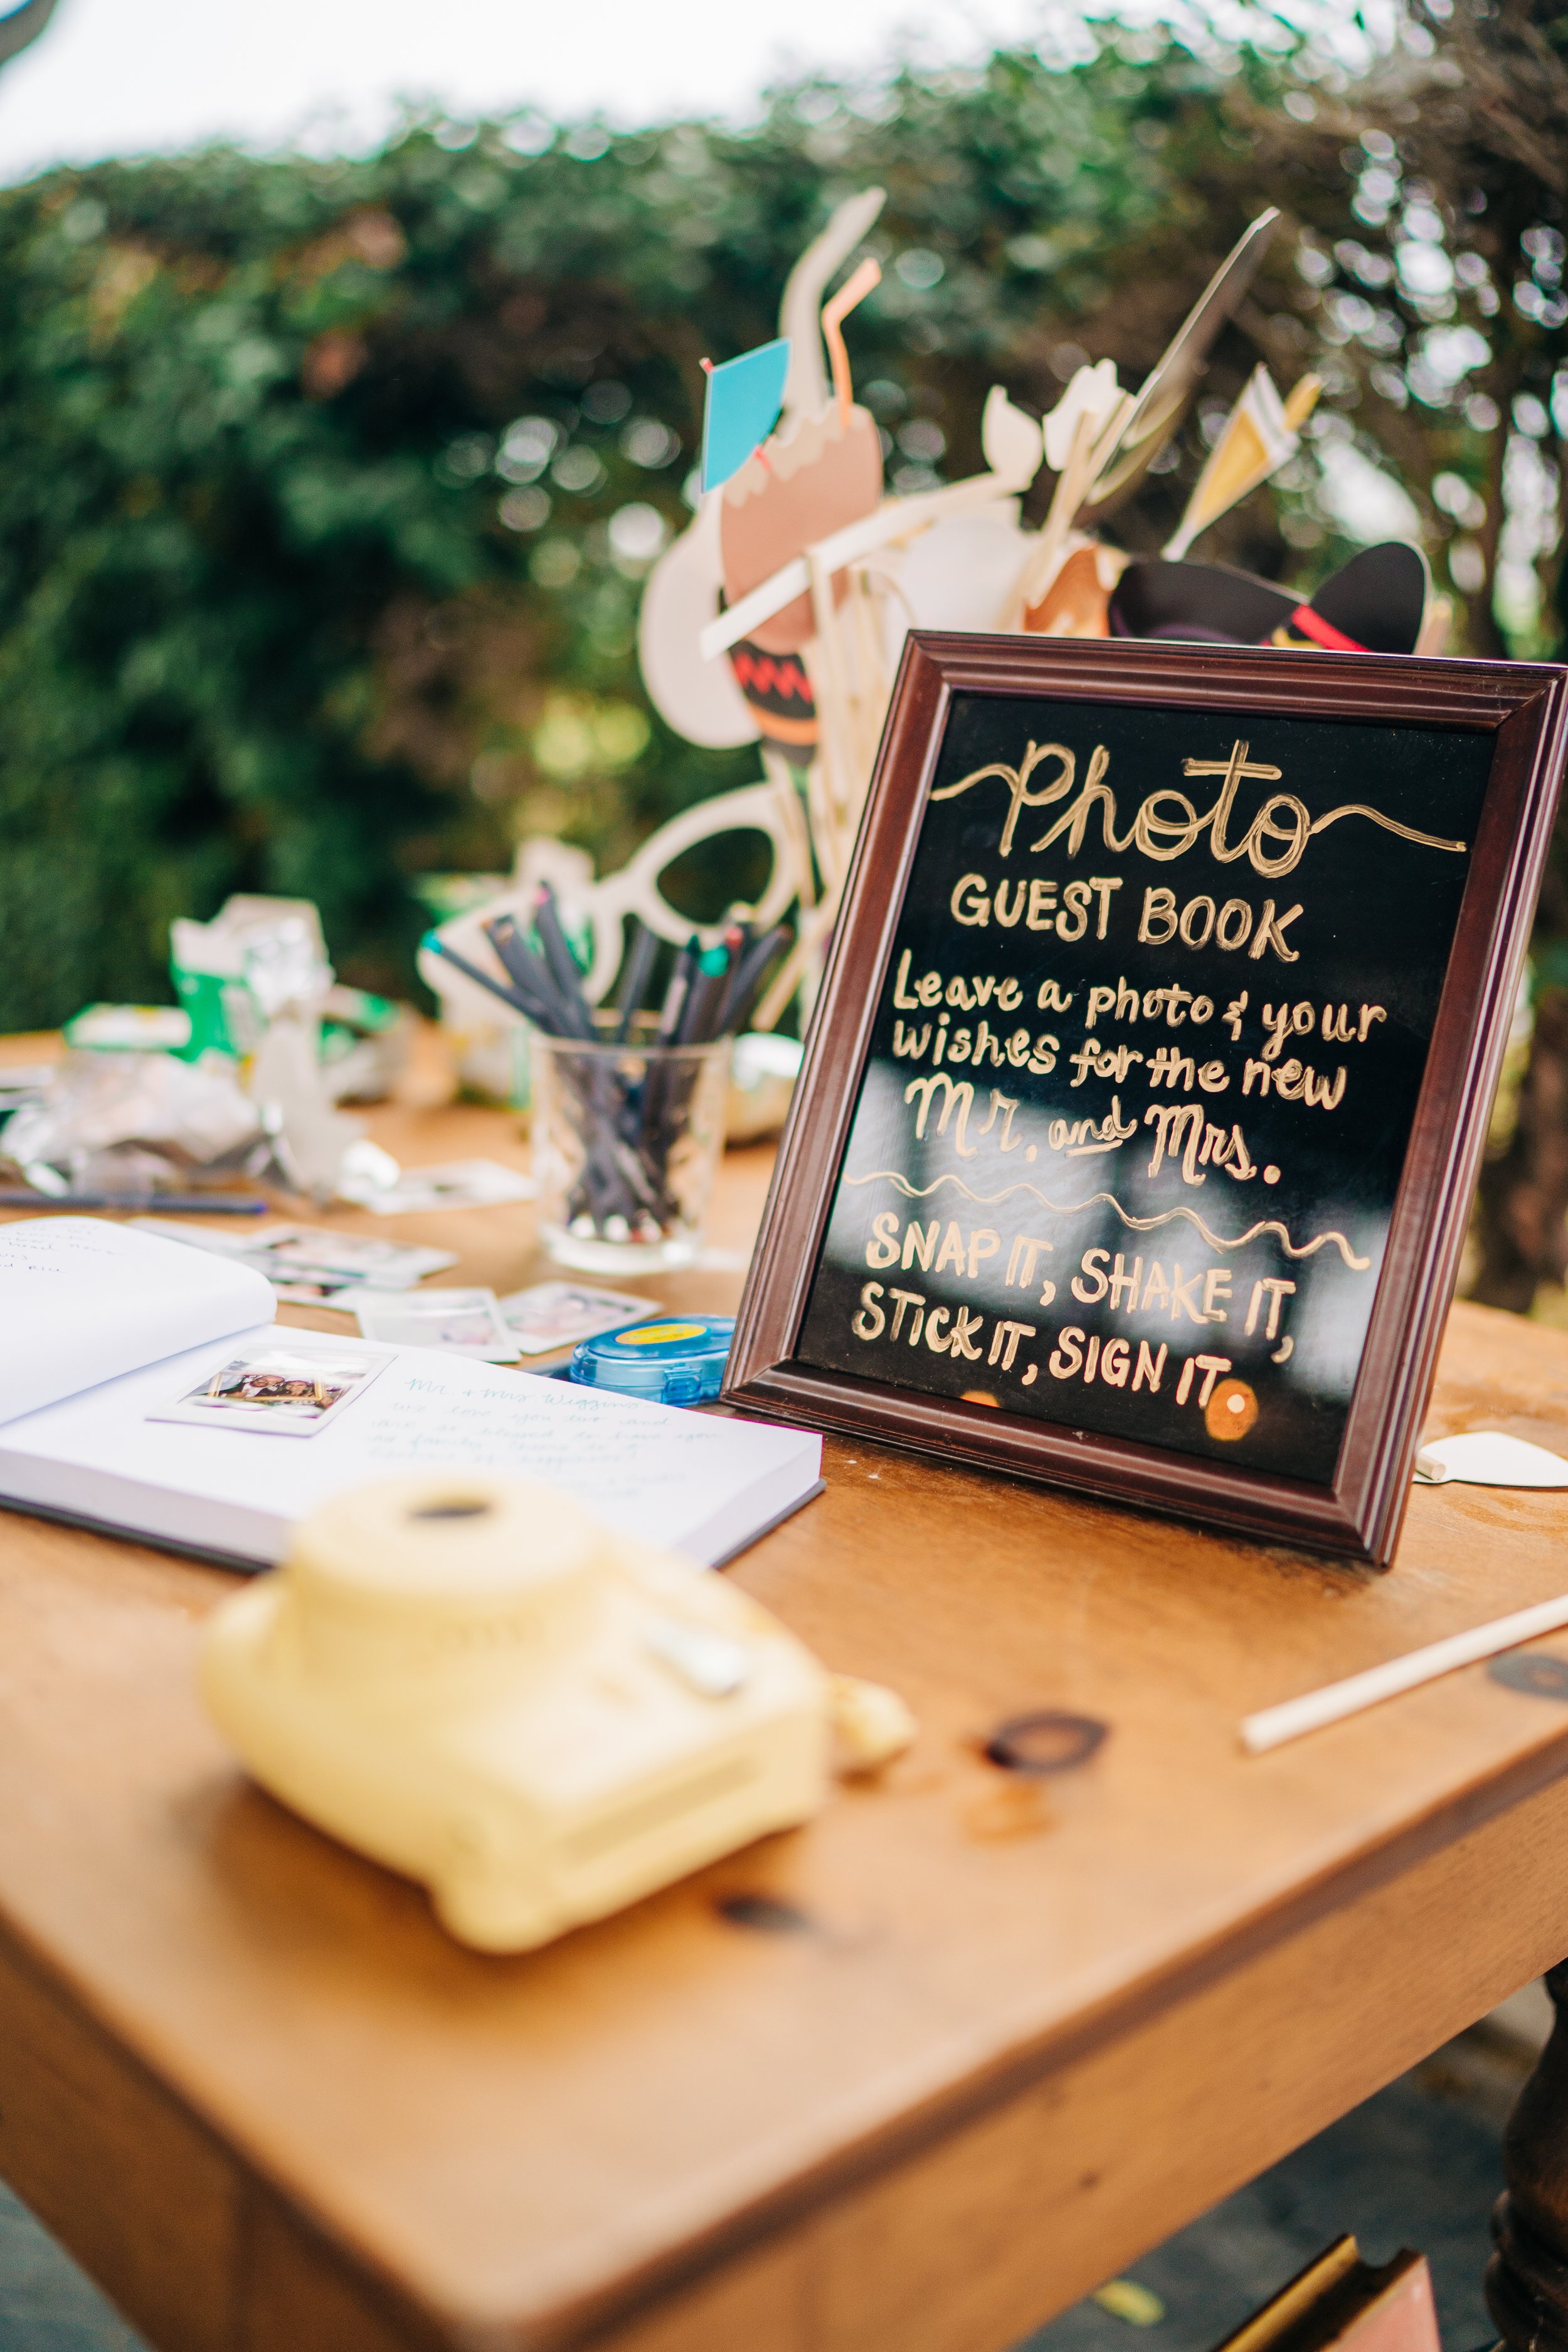 www.santabarbarawedding.com | Brandon Bibbins Photography | The Cottages at Polo Run | Bright Event Rentals | Photo Guest Book